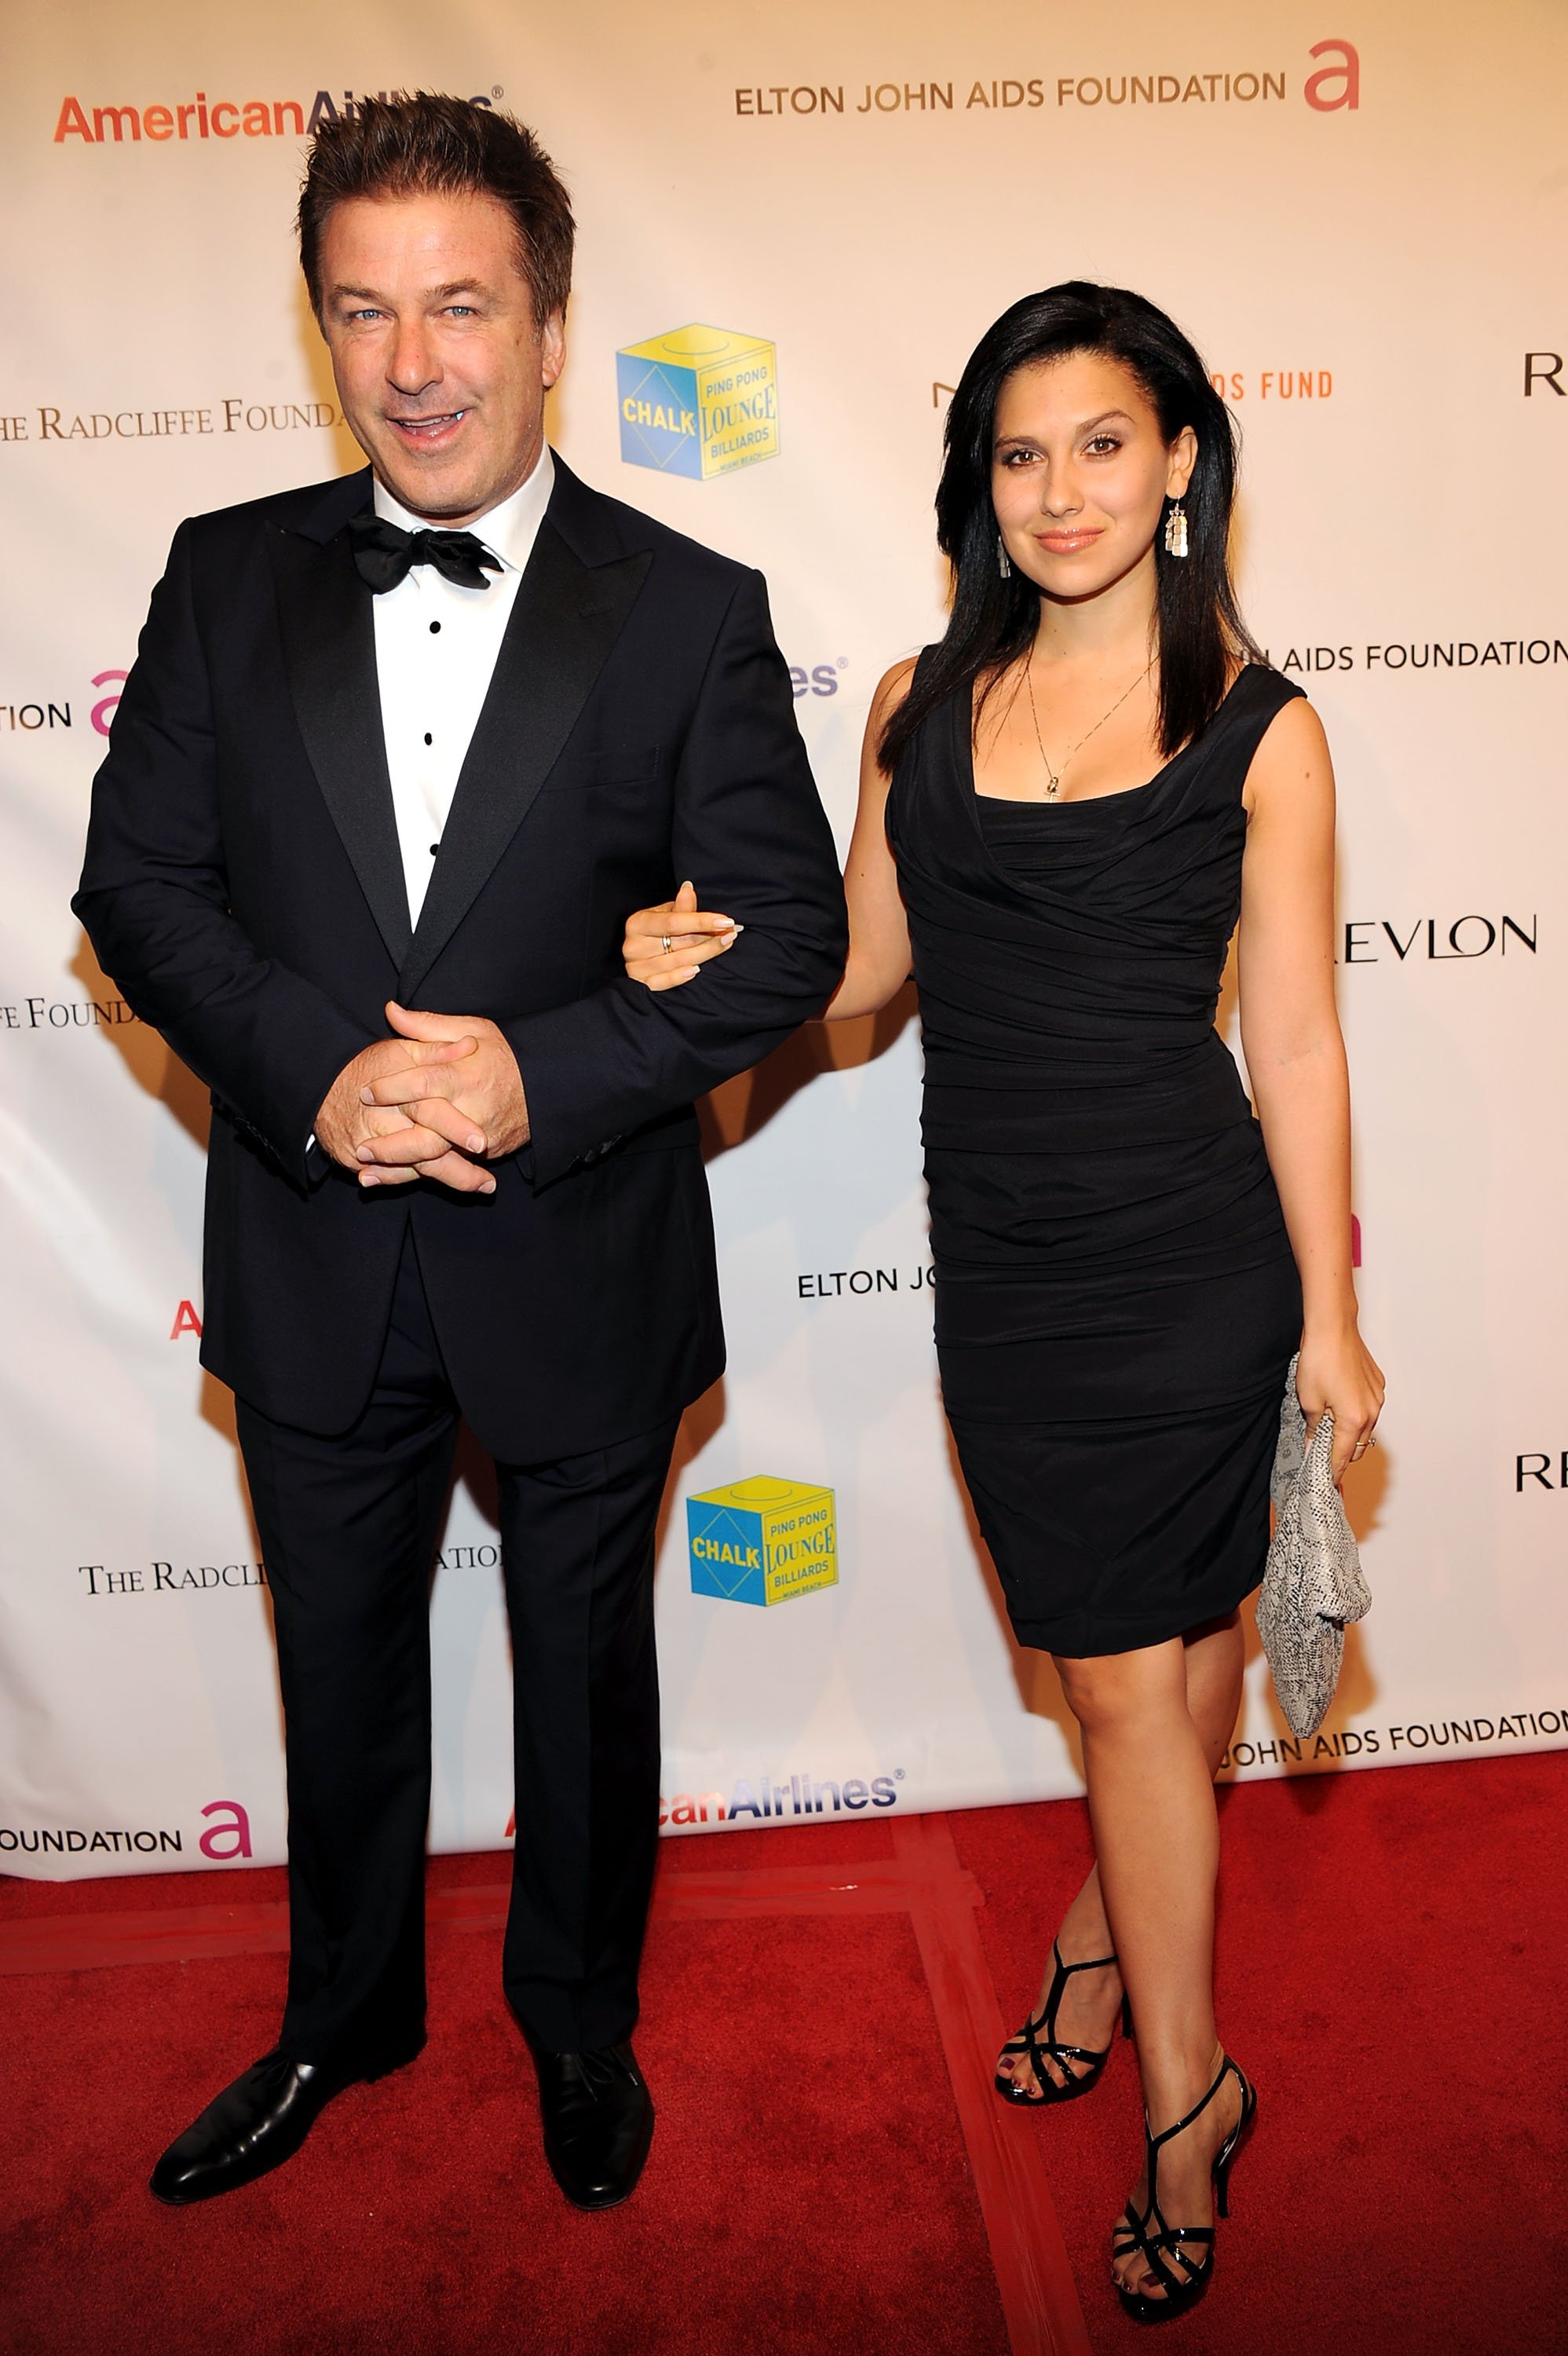 Actor Alec Baldwin and fitness instructor Hilaria Thomas attending the 10th Annual Elton John AIDS Foundation's "An Enduring Vision" benefit at Cipriani Wall Street on October 26, 2011 in New York City. | Source: Getty Images